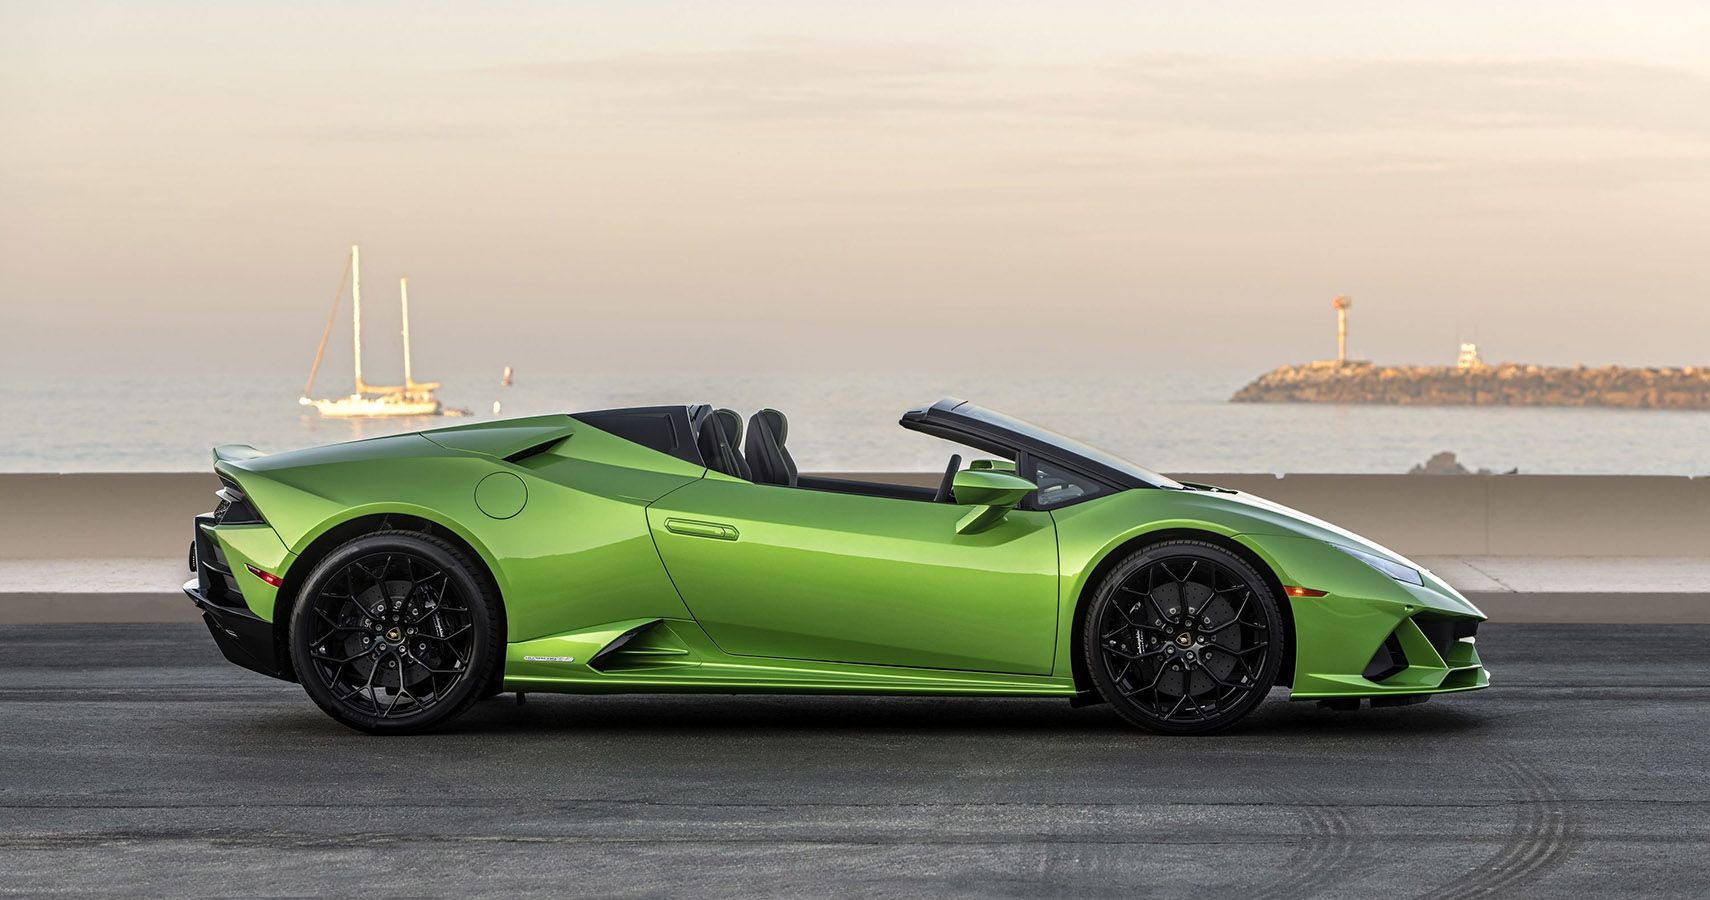 For All That The Car Does Offer, Do Remember That The Huracán Evo Spyder Is Lambo’s “Entry-Level” Model And Things Just Go Up From Here